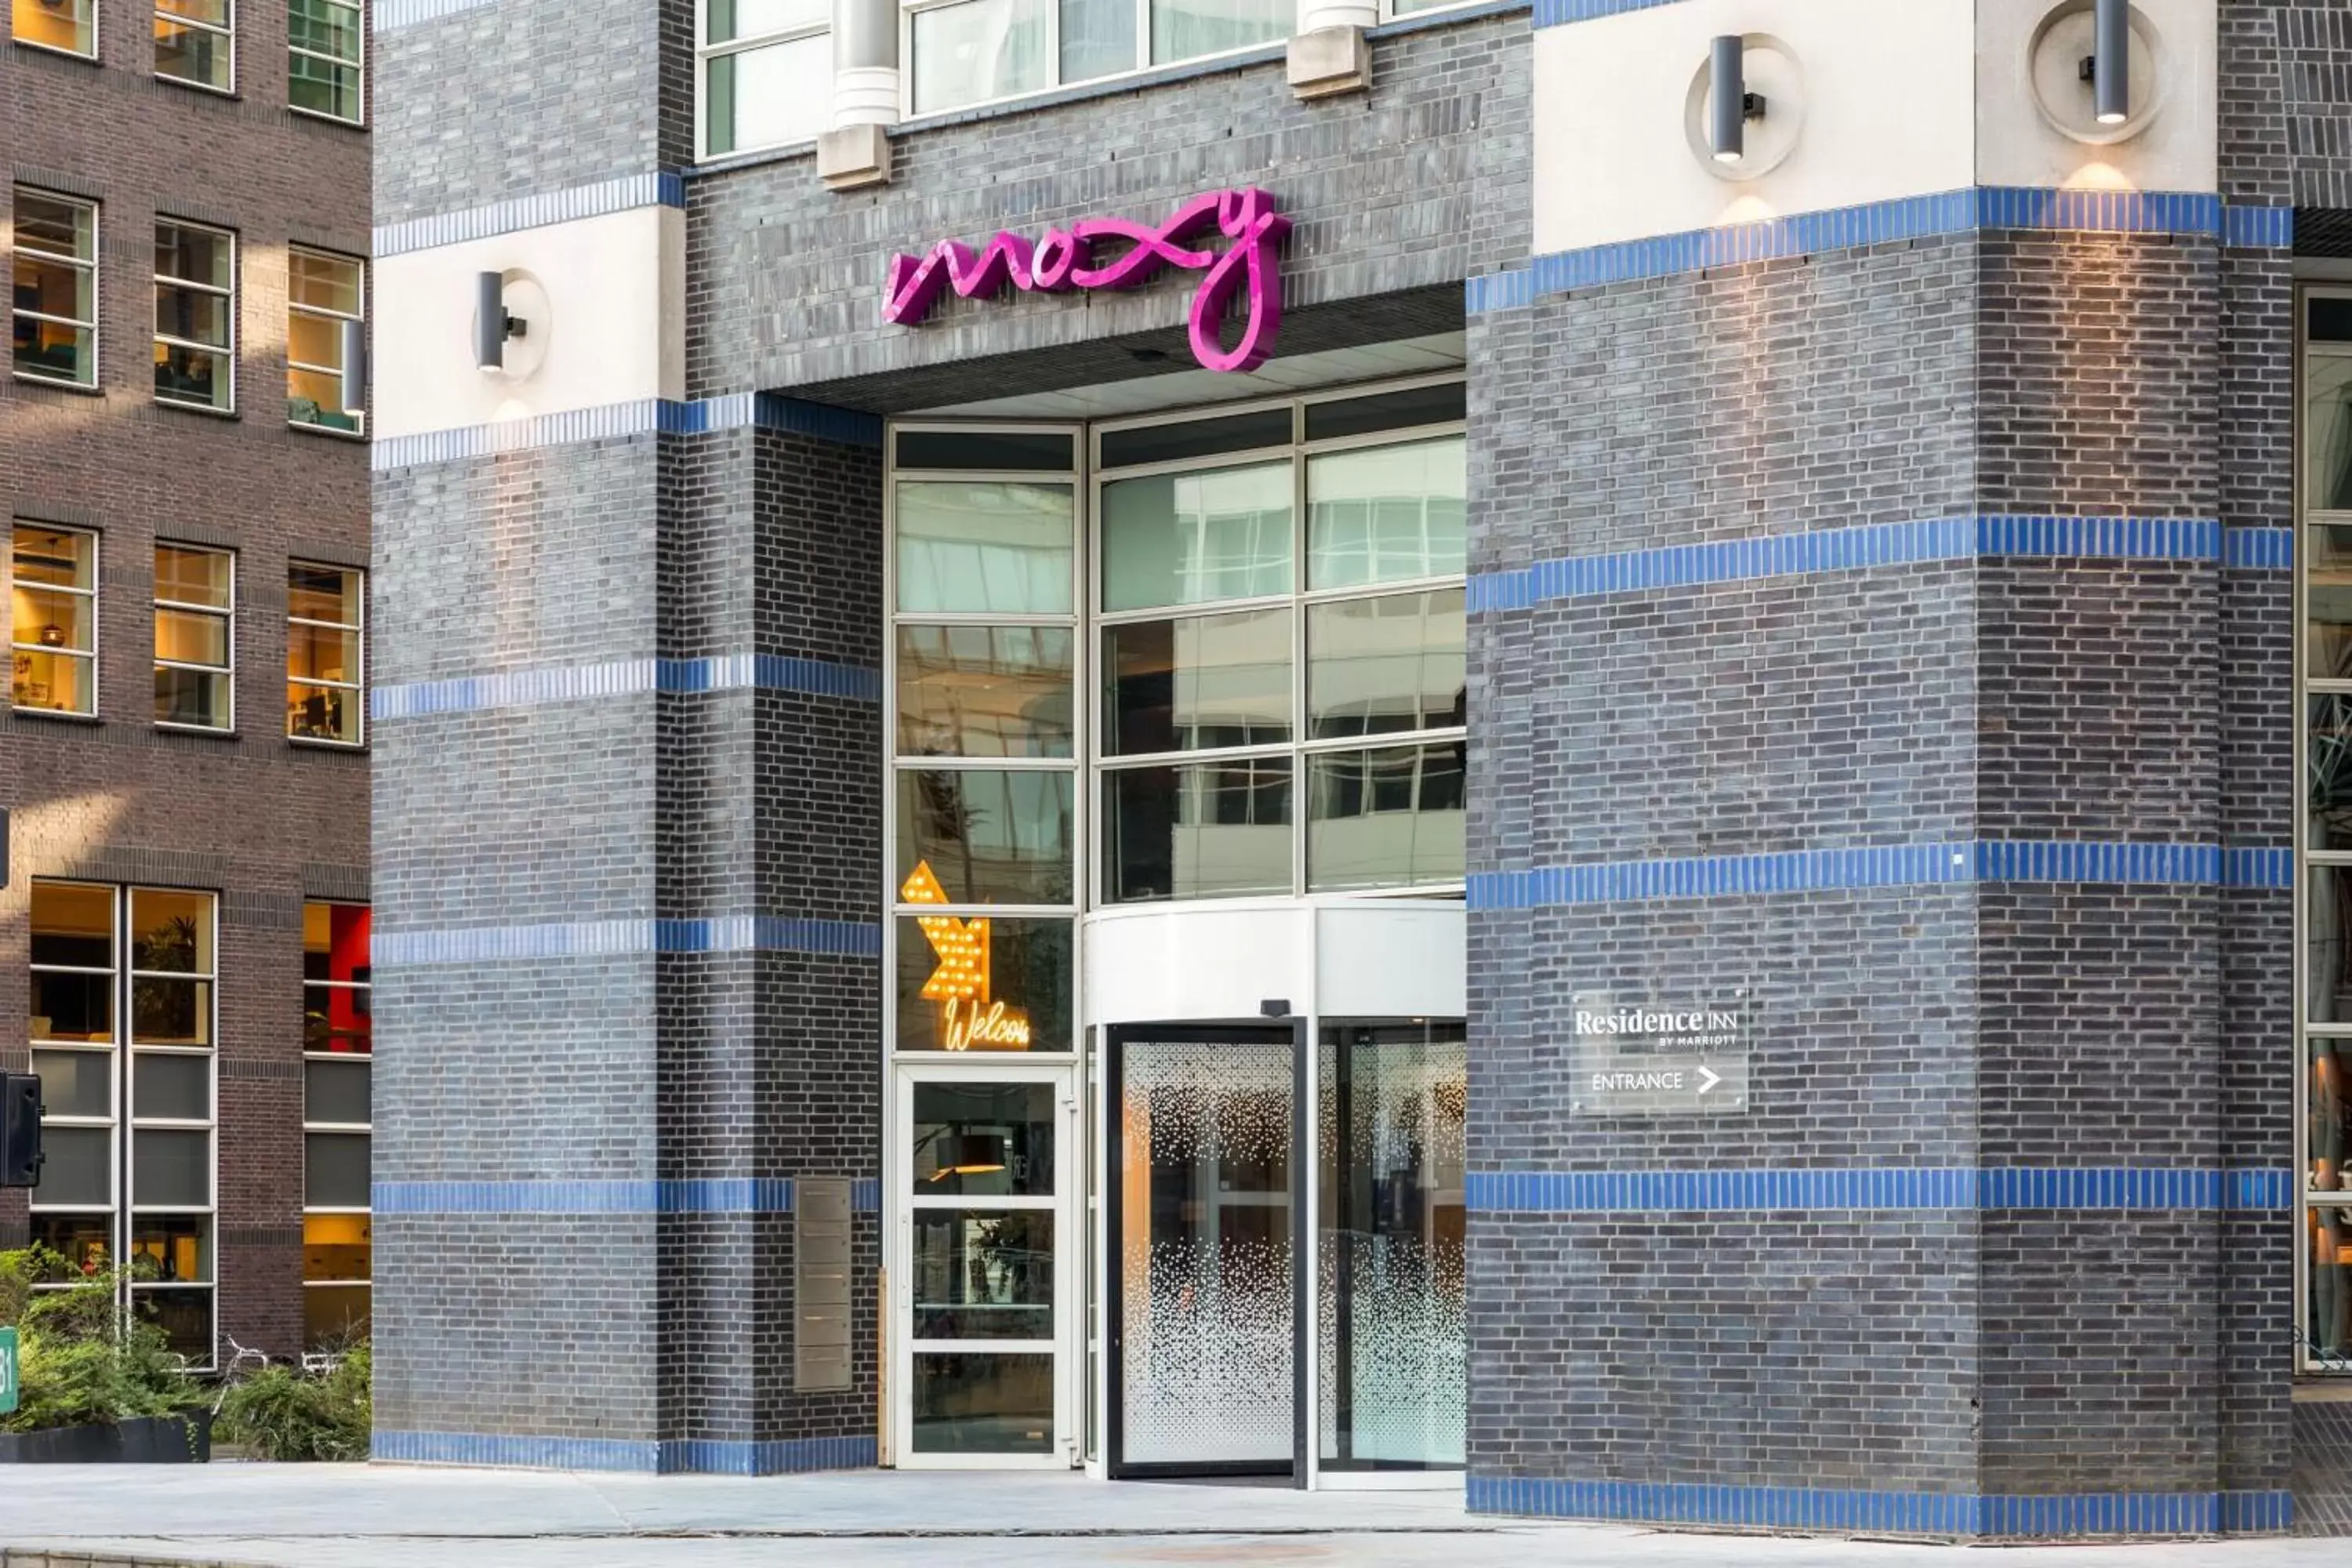 Property Building in Moxy The Hague